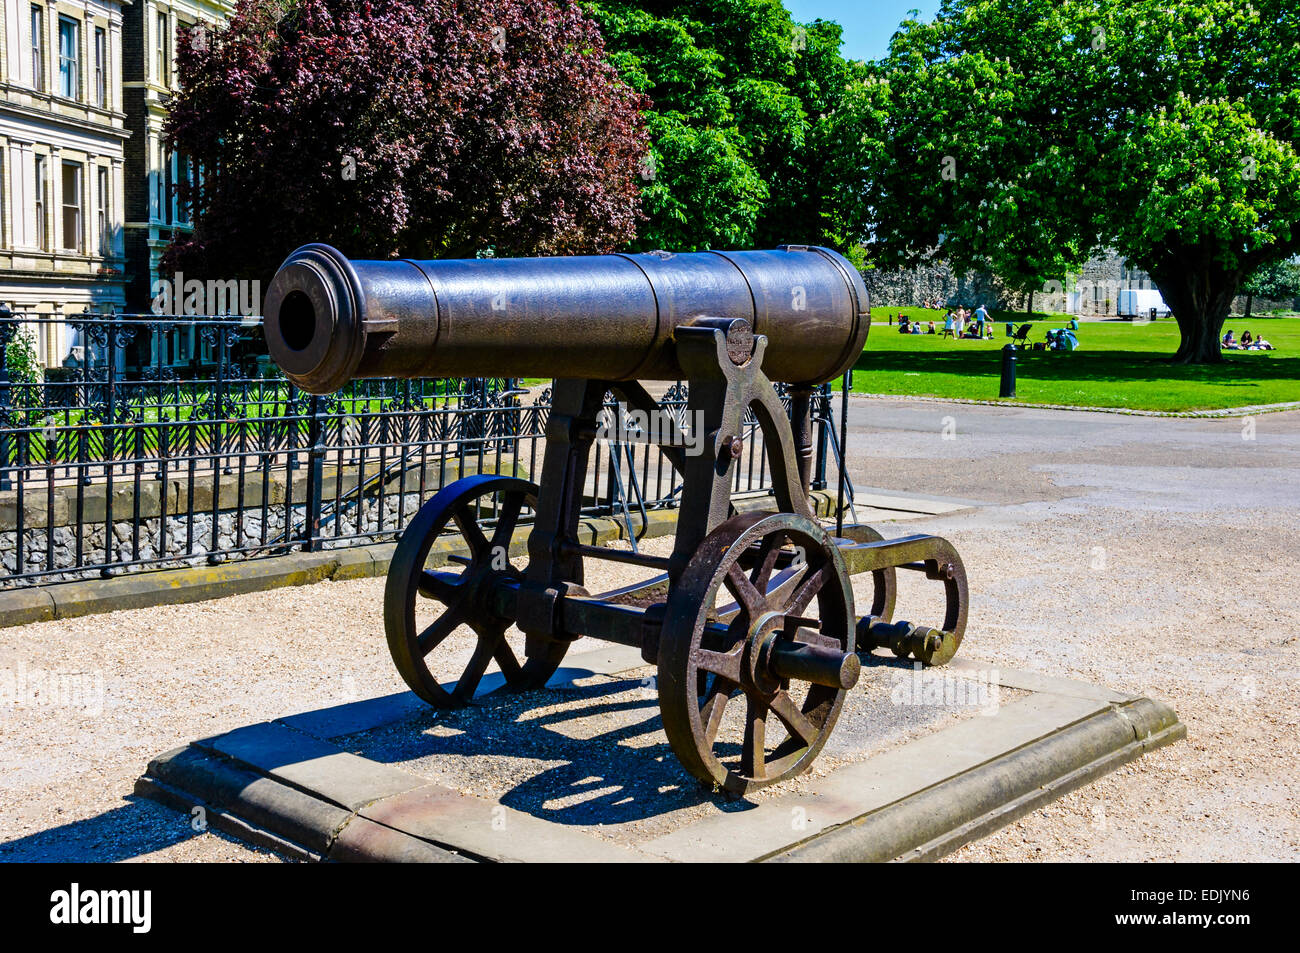 A black cast iron cannon mounted on its carriage stands in the grounds of Rochester castle with green trees and parkland behind Stock Photo